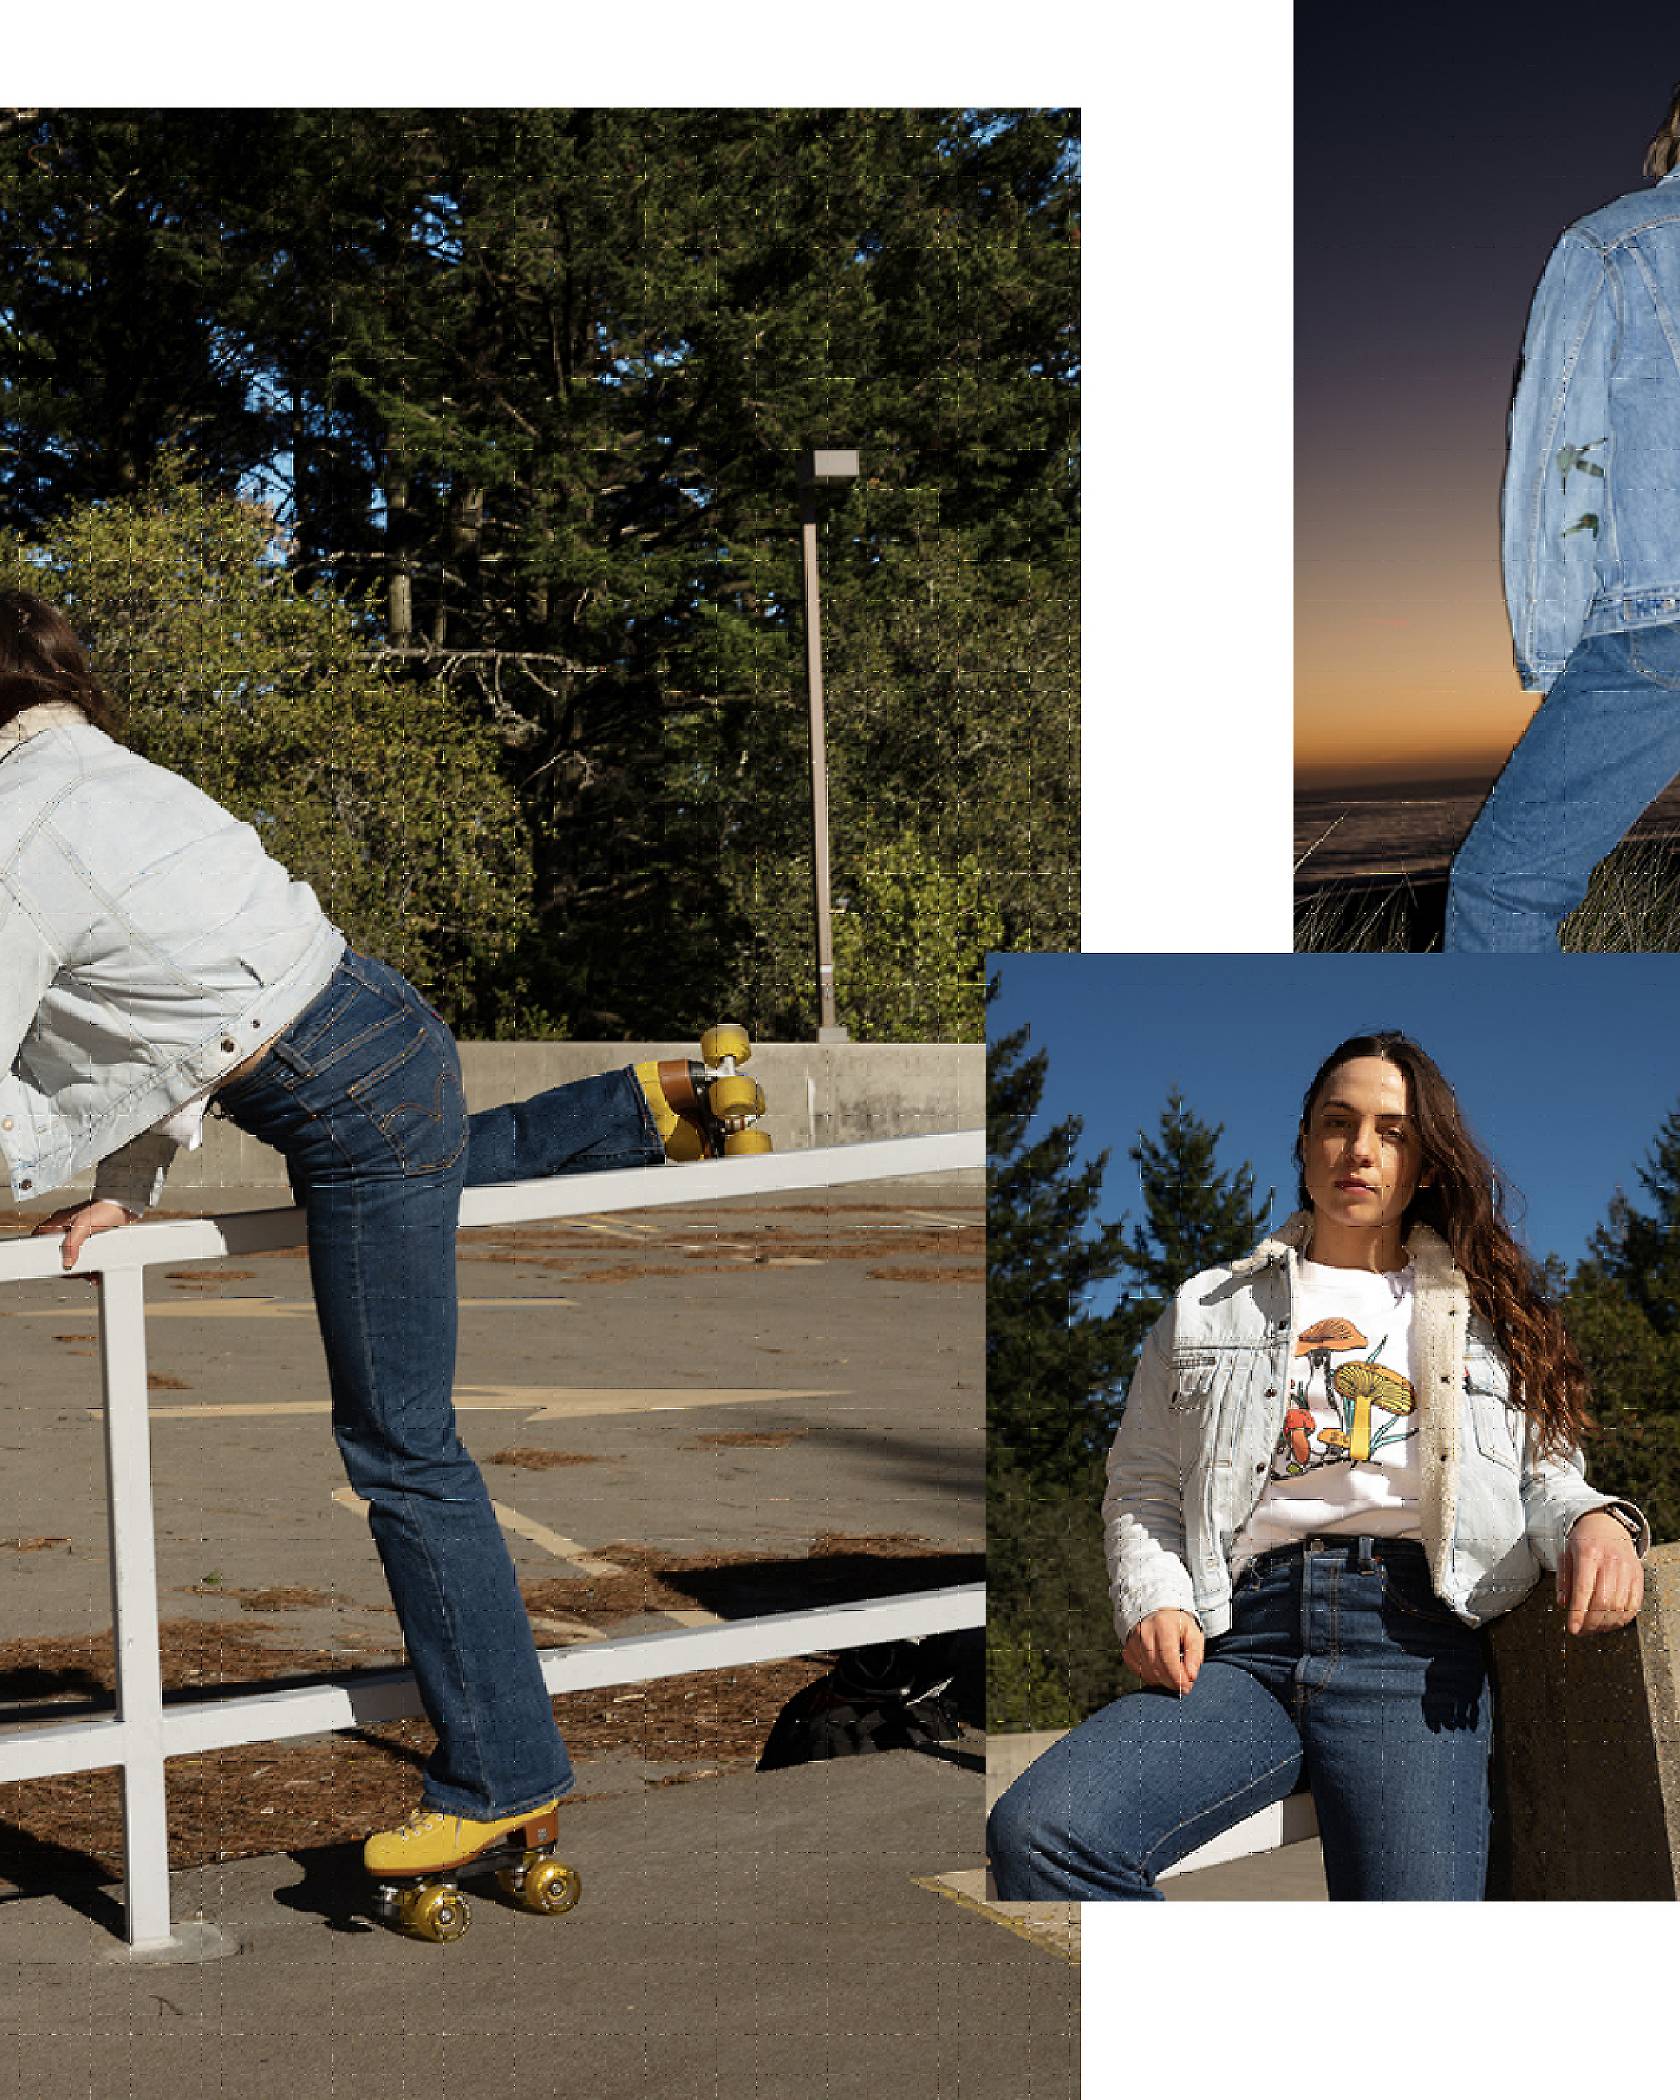 Collage of three images: The left image depicts a woman climbing over a railing while wearing a sherpa trucker jacket and yellow rollerblades. The upper right image is of someone wearing a denim trucker jacket with images of birds painted on the back. The lower right image shows a woman wearing a sherpa trucker jacket and white tee shirt with mushrooms on it.